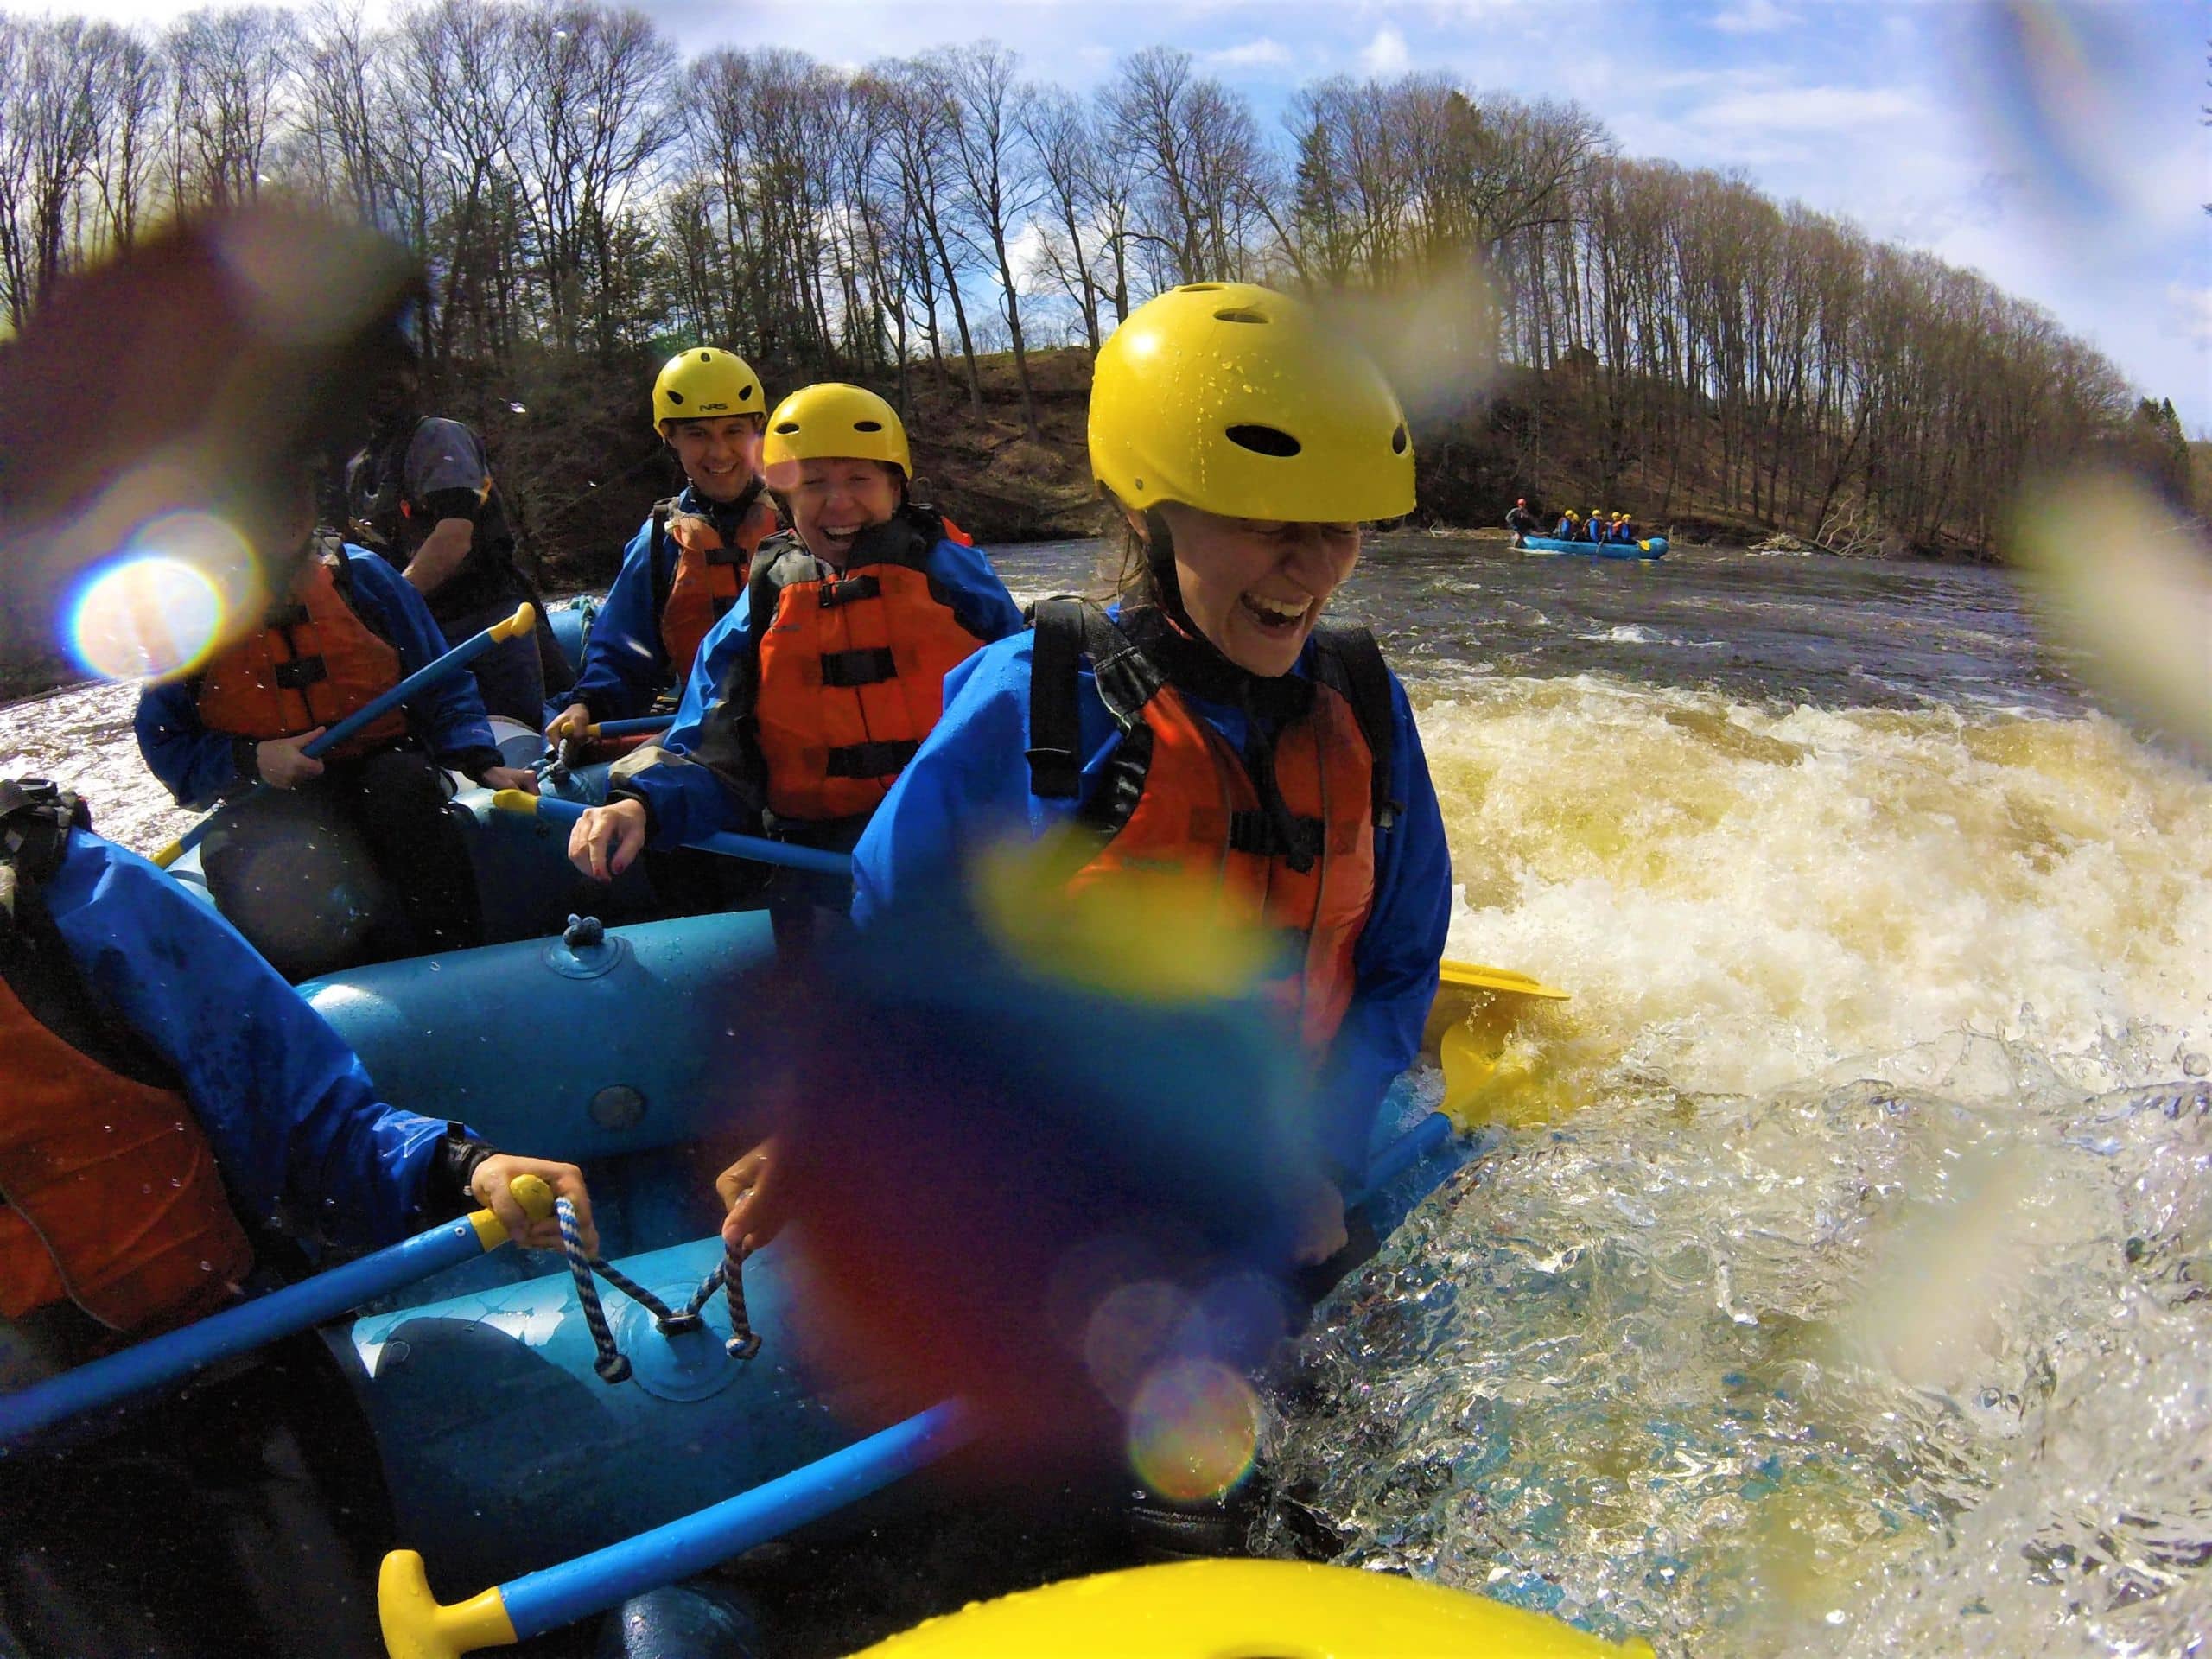 Go pro close-up of a group of rafters headed through a section of whitewater on a rafting trip